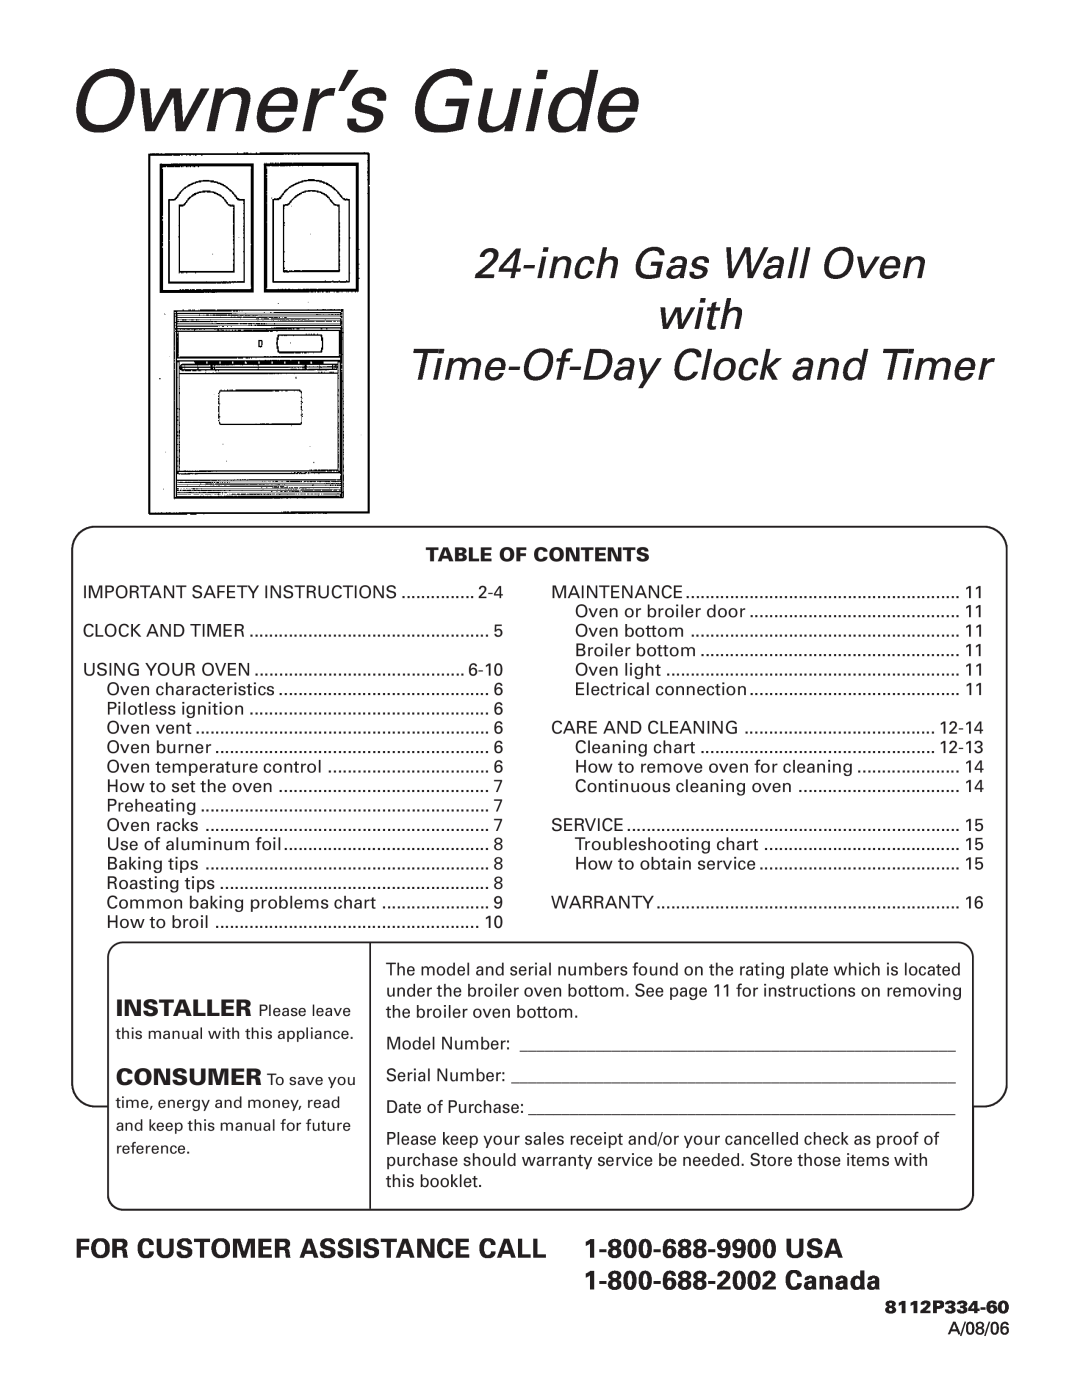 Magic Chef 9112 Gas important safety instructions Table Of Contents, Owner’s Guide, inchGas Wall Oven with, 8112P334-60 